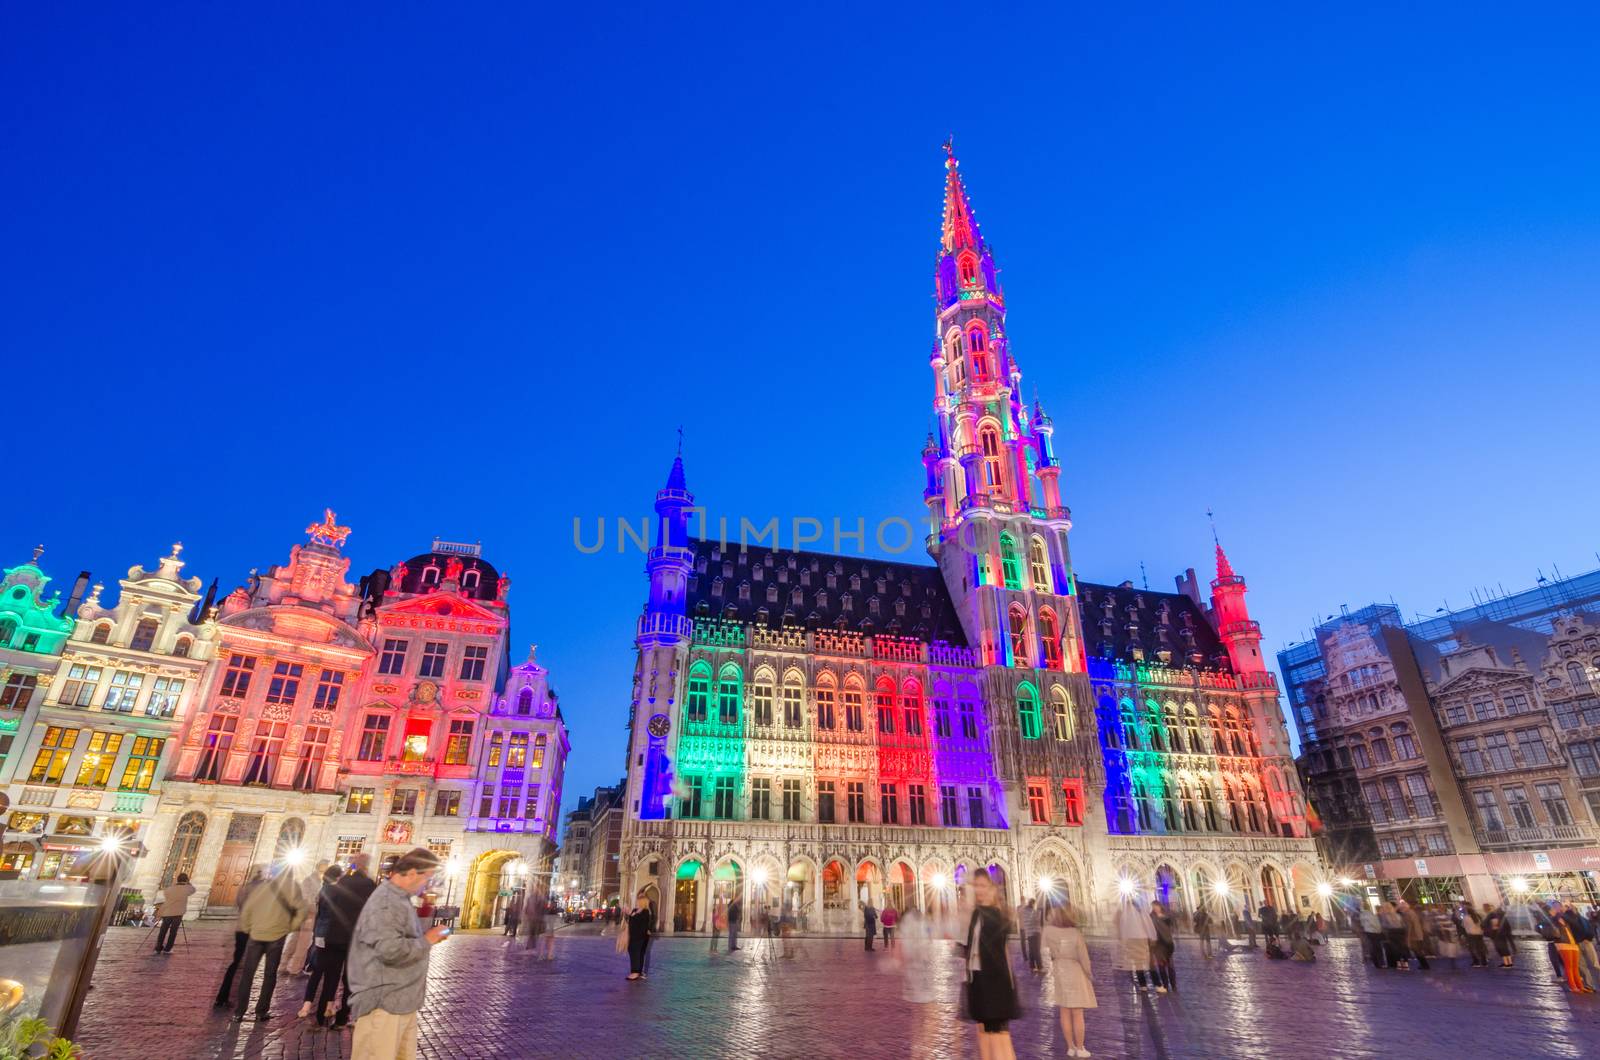 Brussels, Belgium - May 13, 2015: Tourists visiting famous Grand Place (Grote Markt) the central square of Brussels. The square is the most important tourist destination and most memorable landmark in Brussels. 